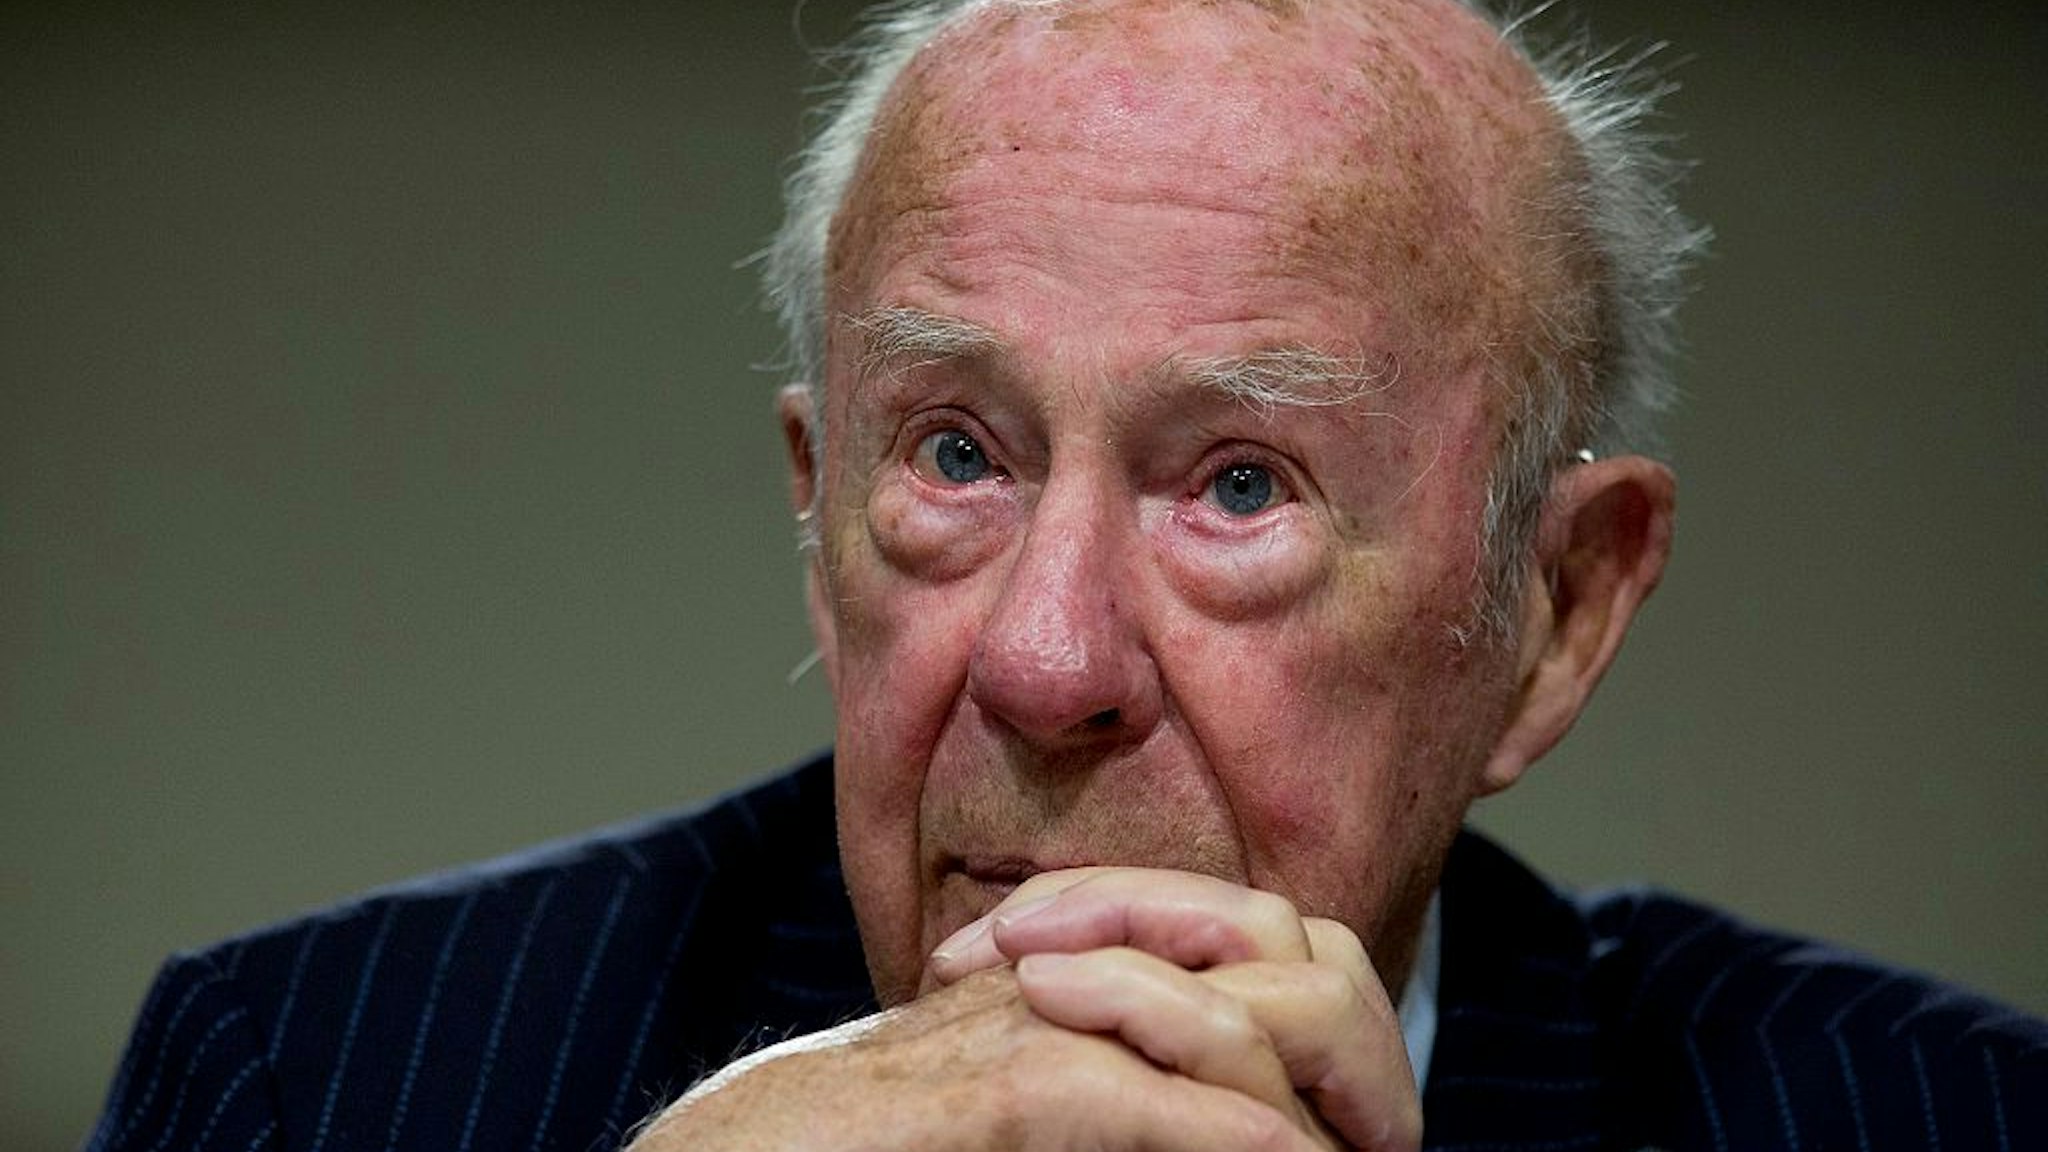 George Shultz, former secretary of state, listens during a Senate Armed Services Committee hearing in Washington, D.C., U.S., on Thursday, Jan. 29, 2015. The hearing was titled "Global Challenges and the U.S. National Security Strategy." Photographer: Andrew Harrer/Bloomberg via Getty Images